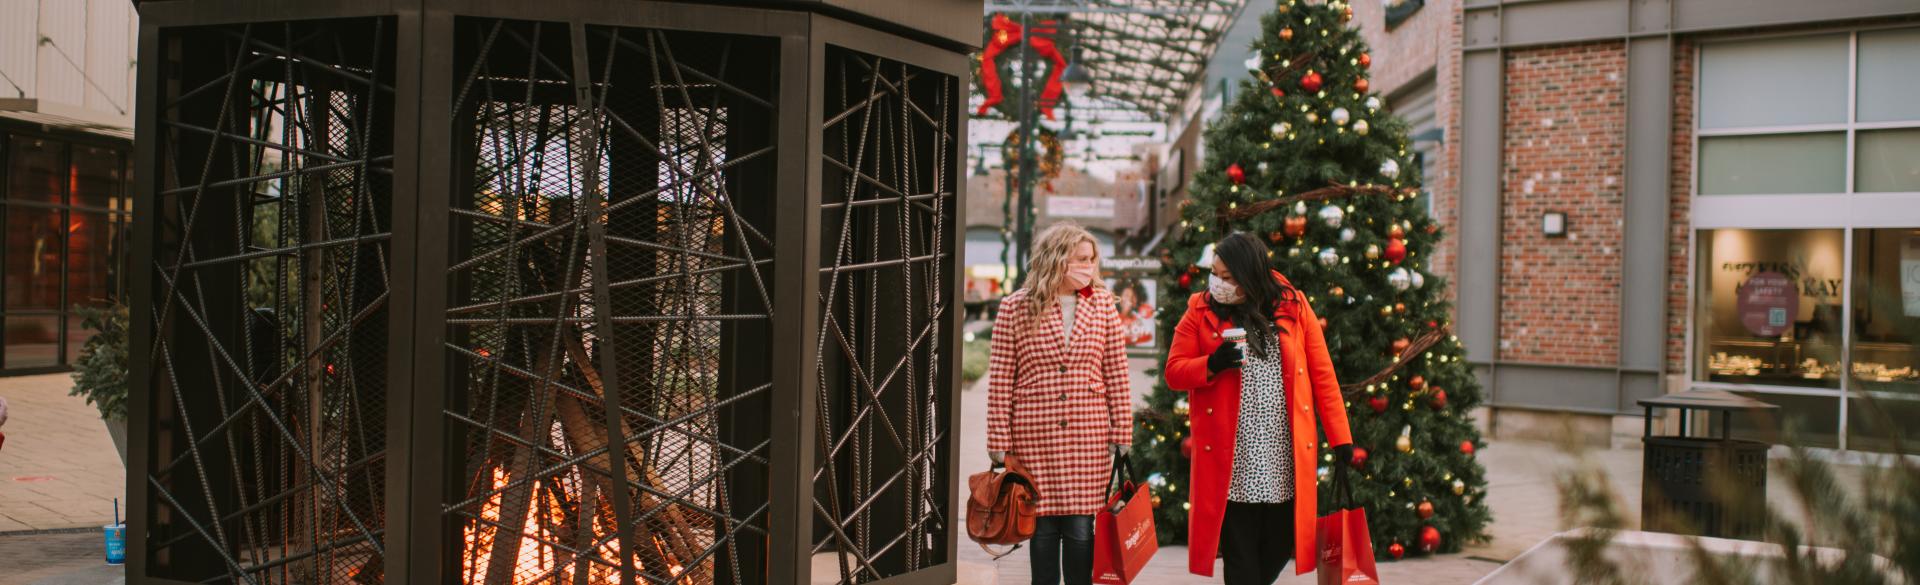 Tanger Outlets Grand Rapids - Holiday Shopping